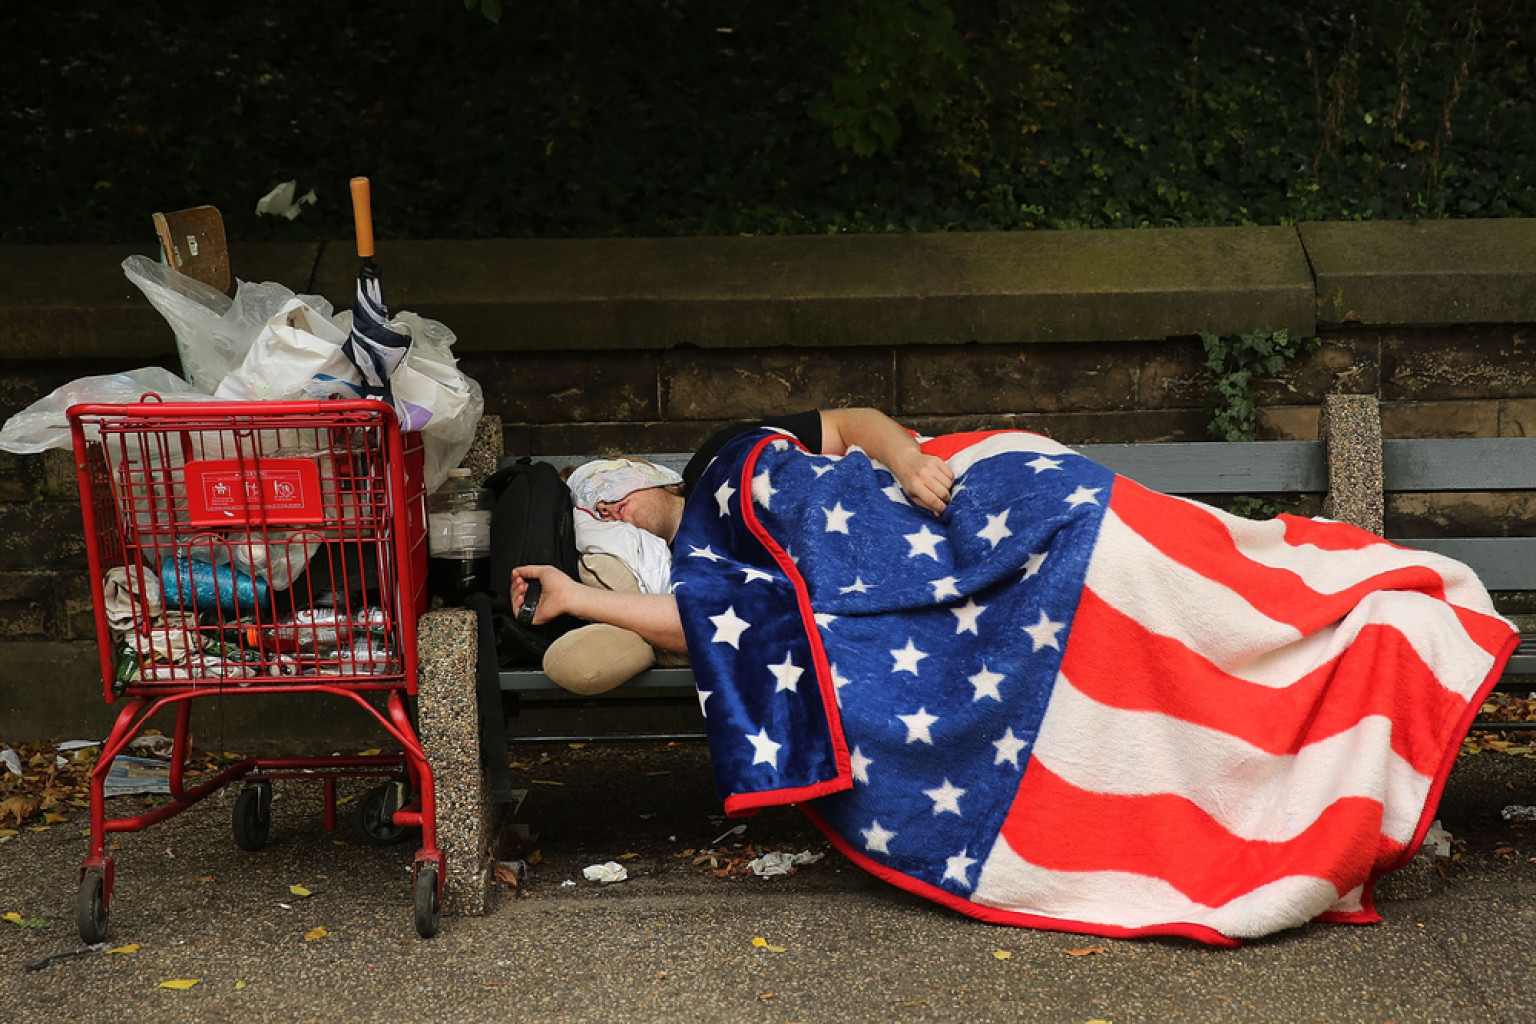 NEW YORK, NY - SEPTEMBER 10: A homeless man sleeps under an American Flag blanket on a park bench on September 10, 2013 in the Brooklyn borough of New York City. As of June 2013, there were an all-time record of 50,900 homeless people, including 12,100 homeless families with 21,300 homeless children homeless in New York City. (Photo by Spencer Platt/Getty Images) *** BESTPIX ***